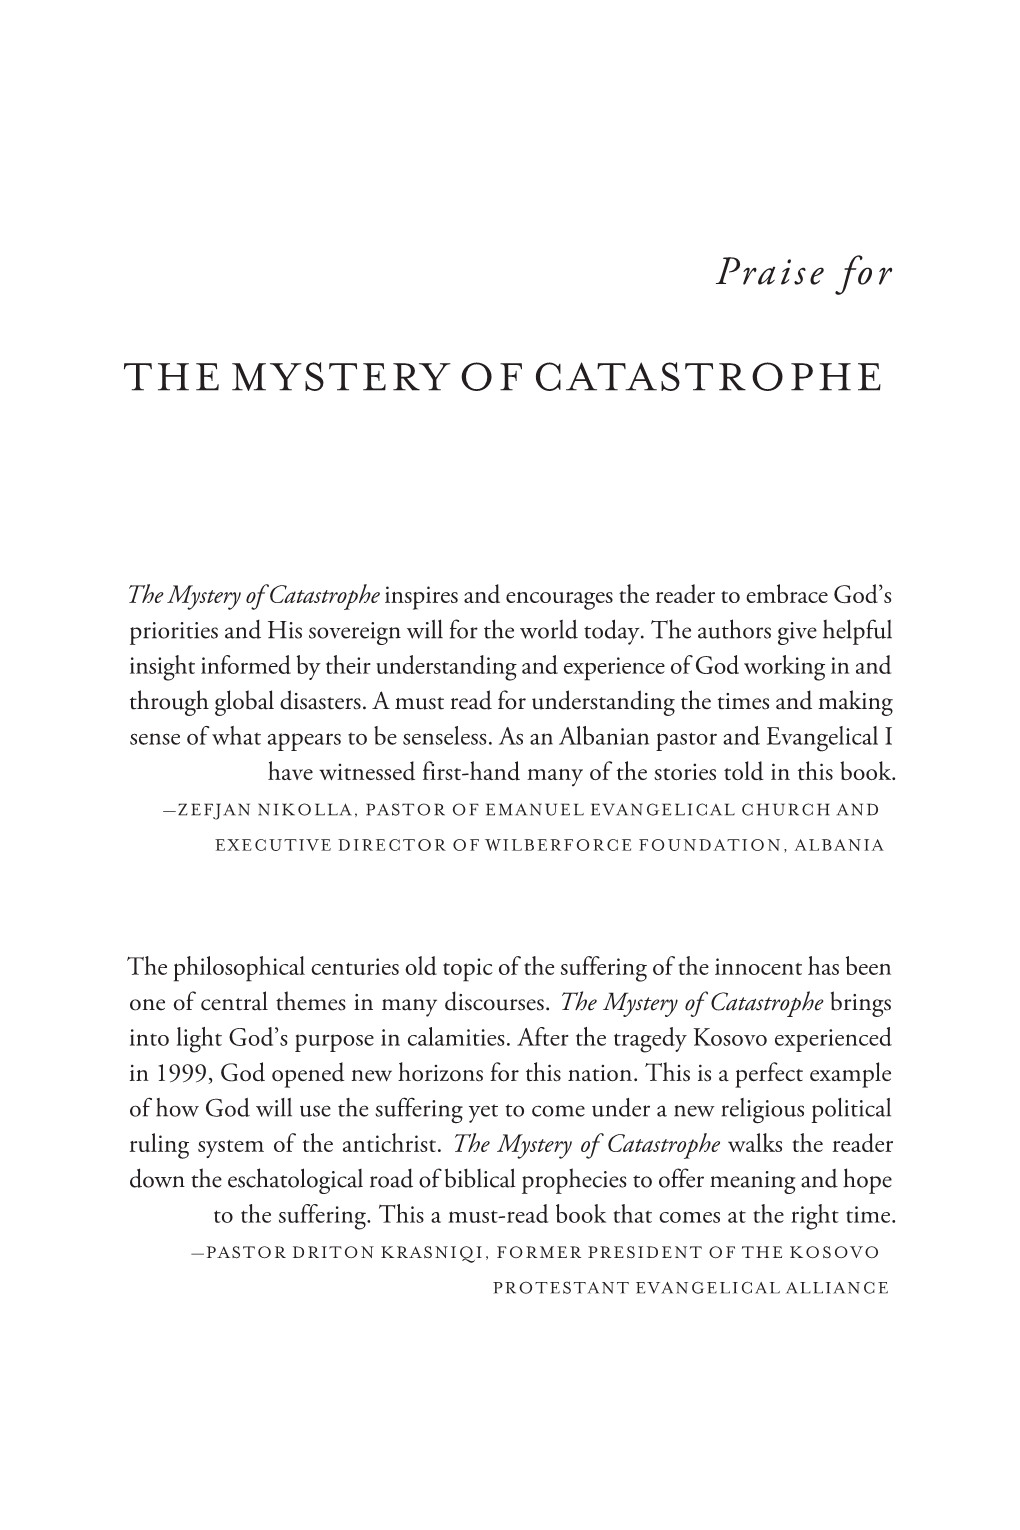 The Mystery of Catastrophe